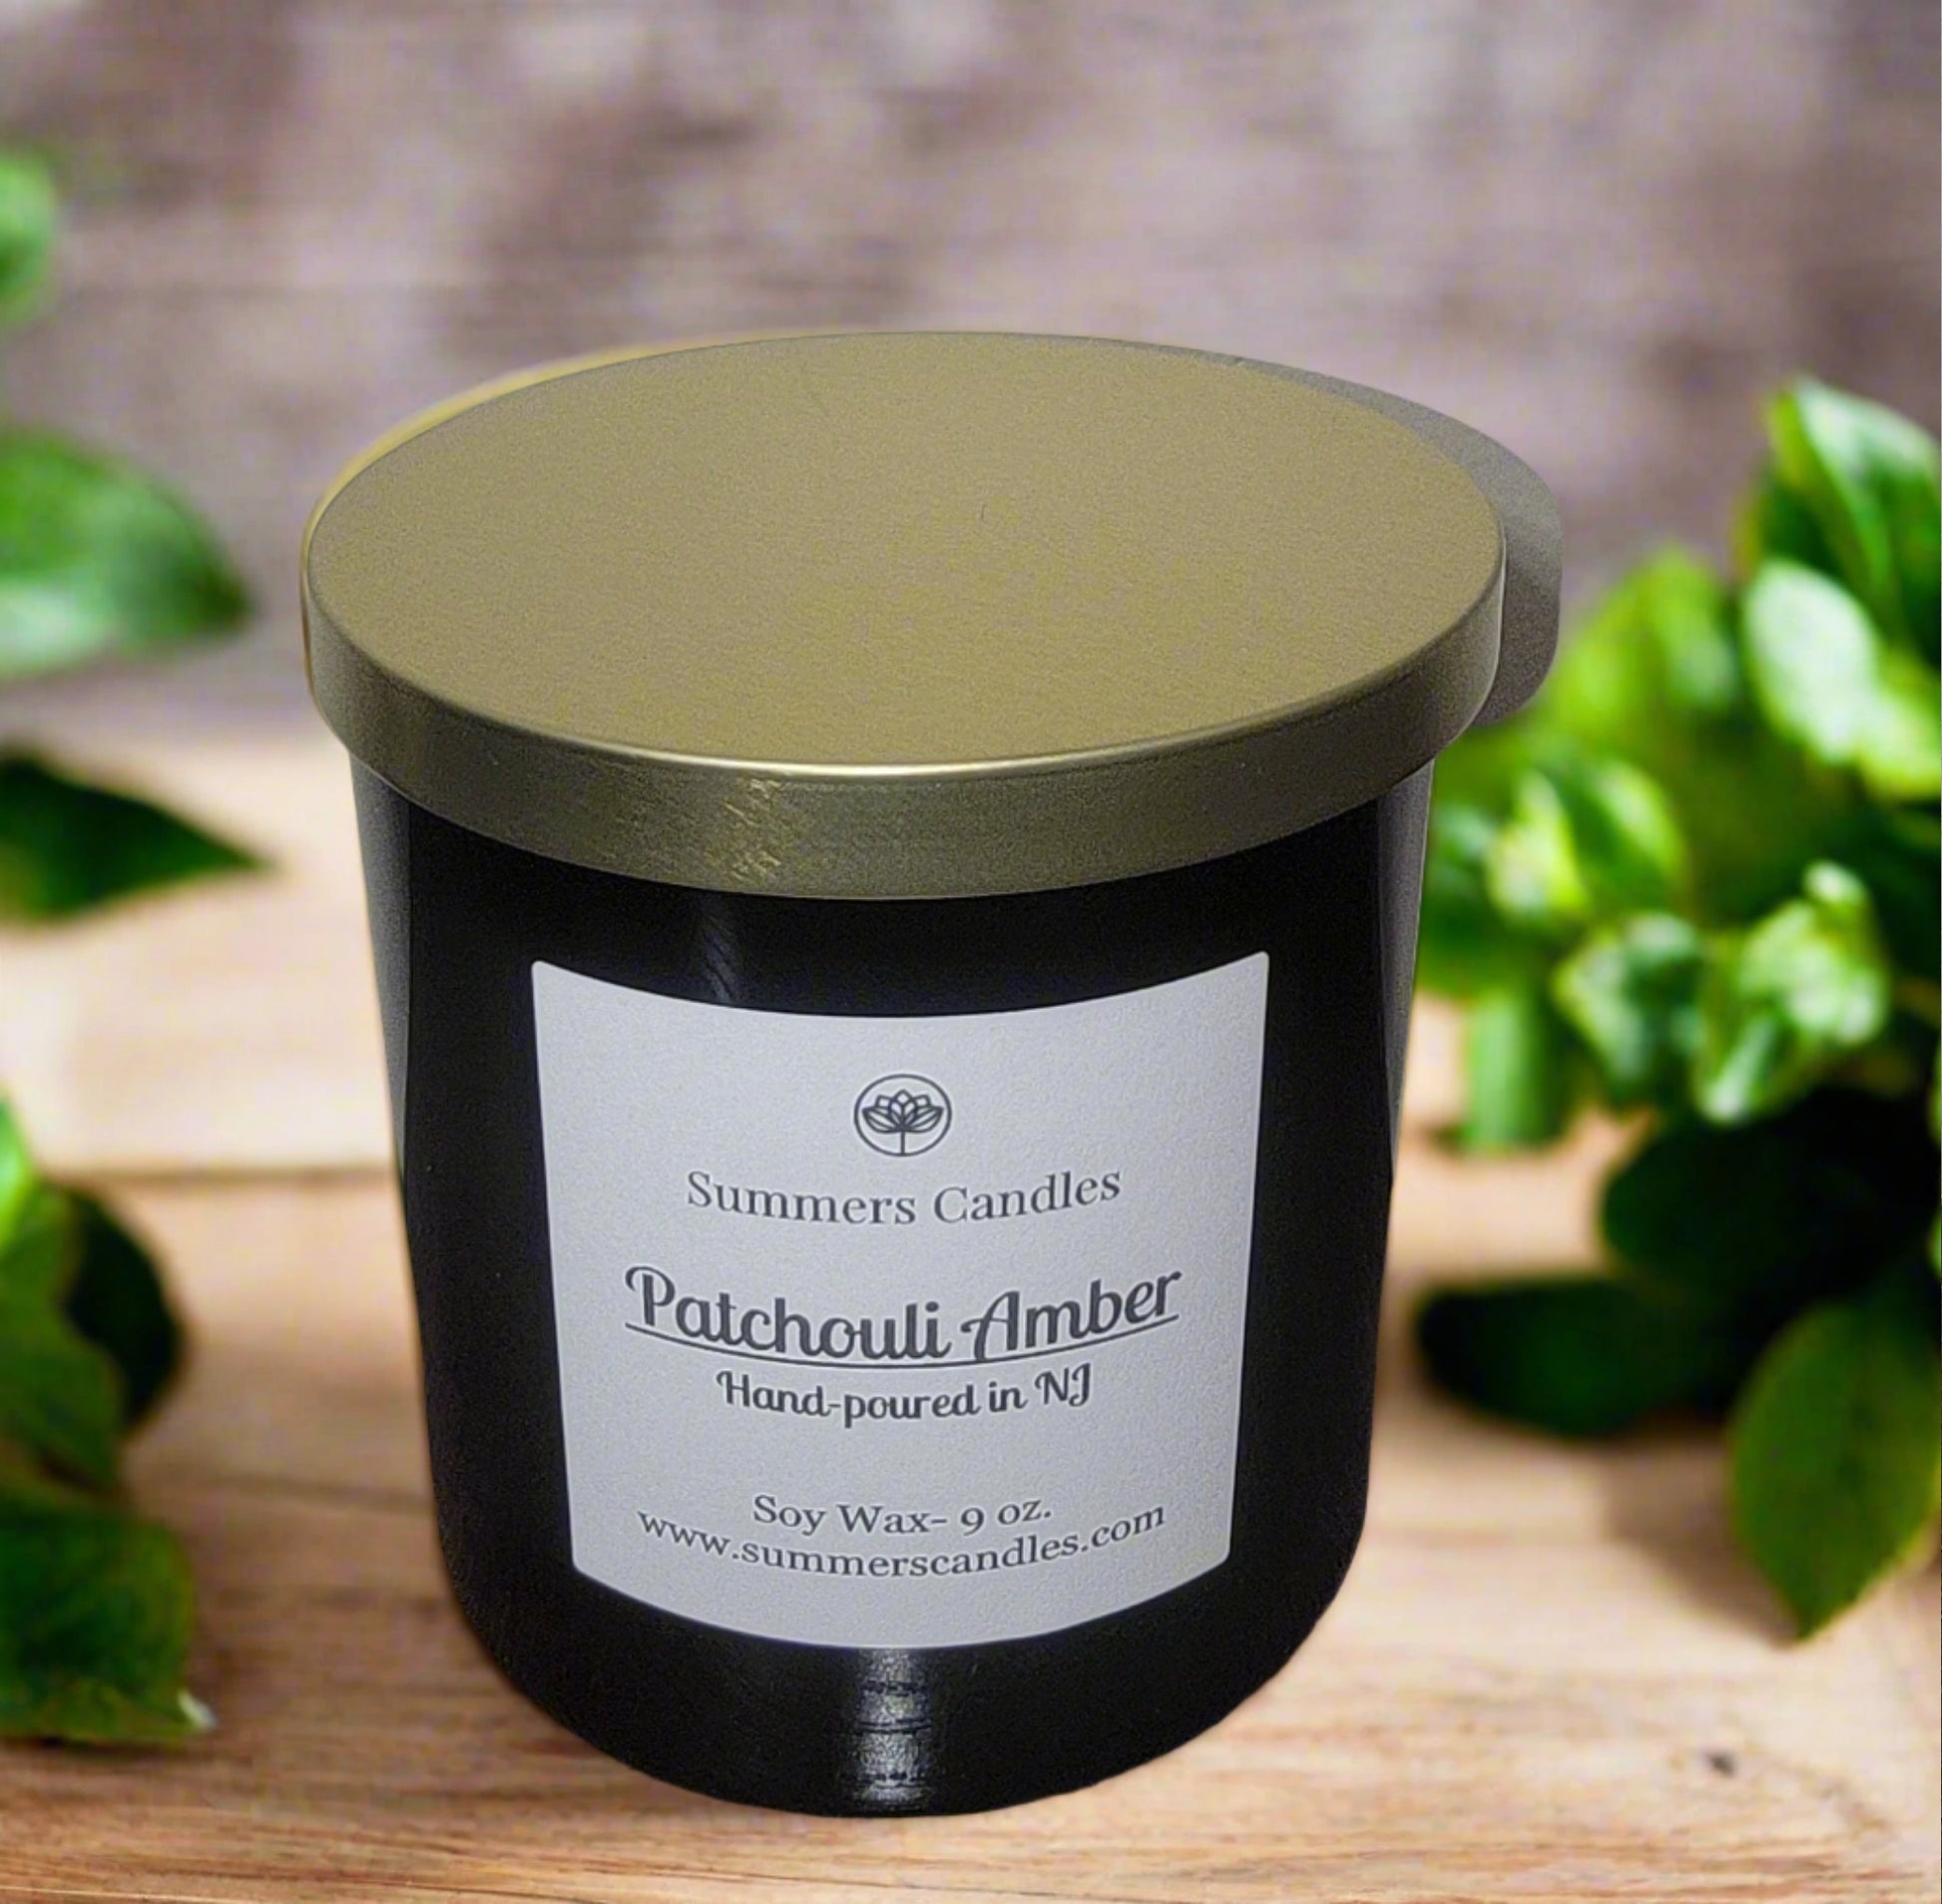 Patchouli Amber- Summers Candles